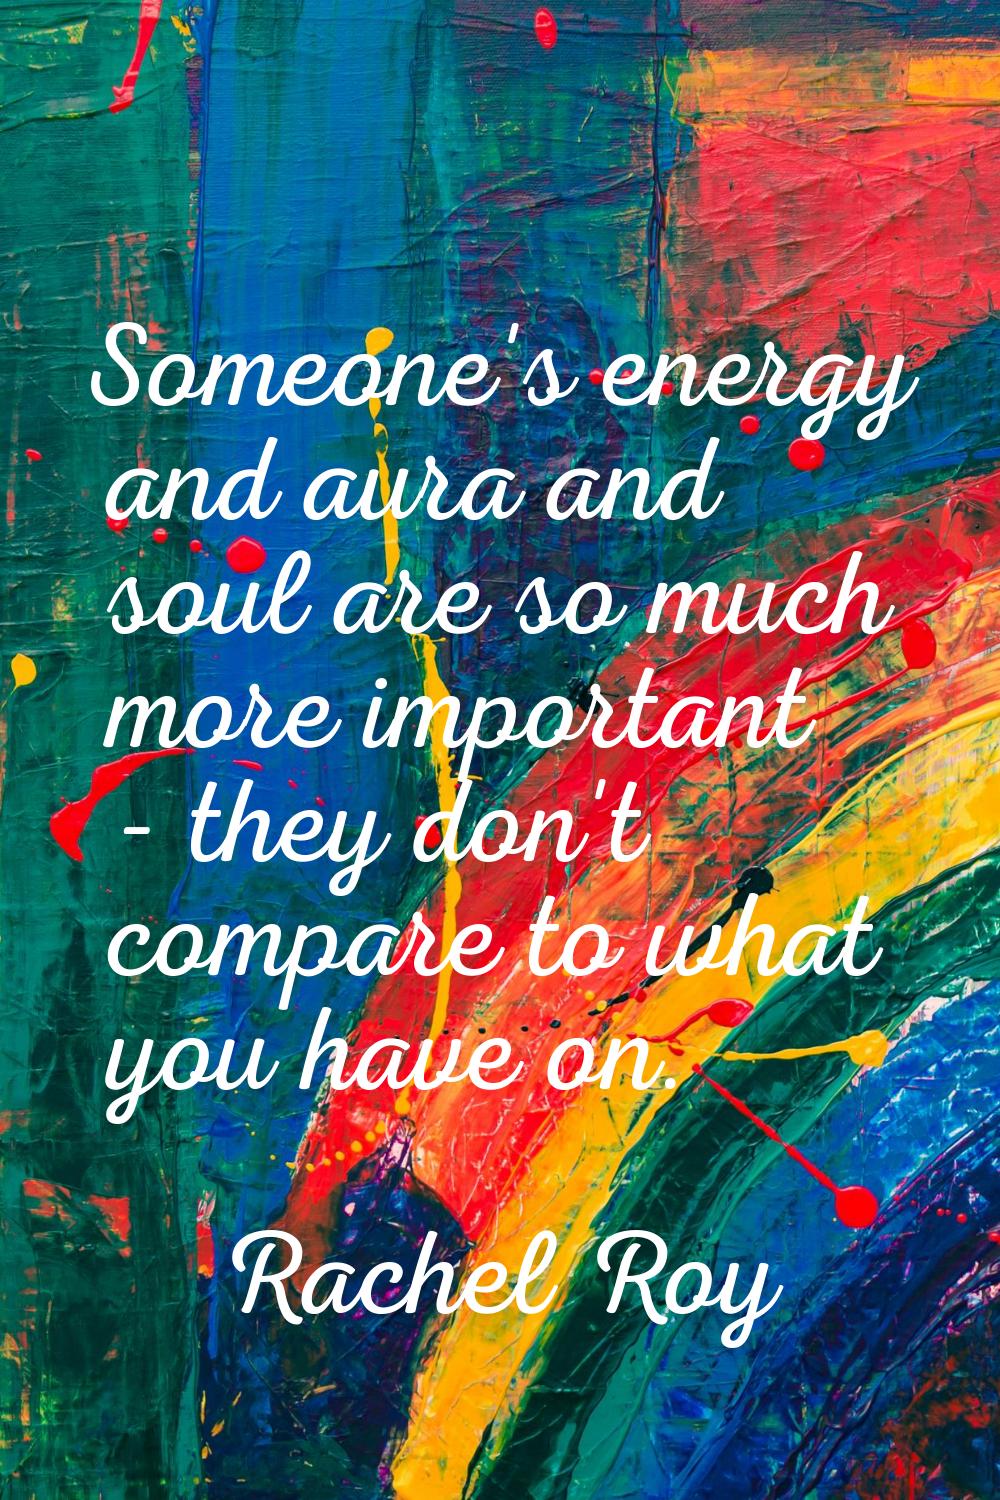 Someone's energy and aura and soul are so much more important - they don't compare to what you have